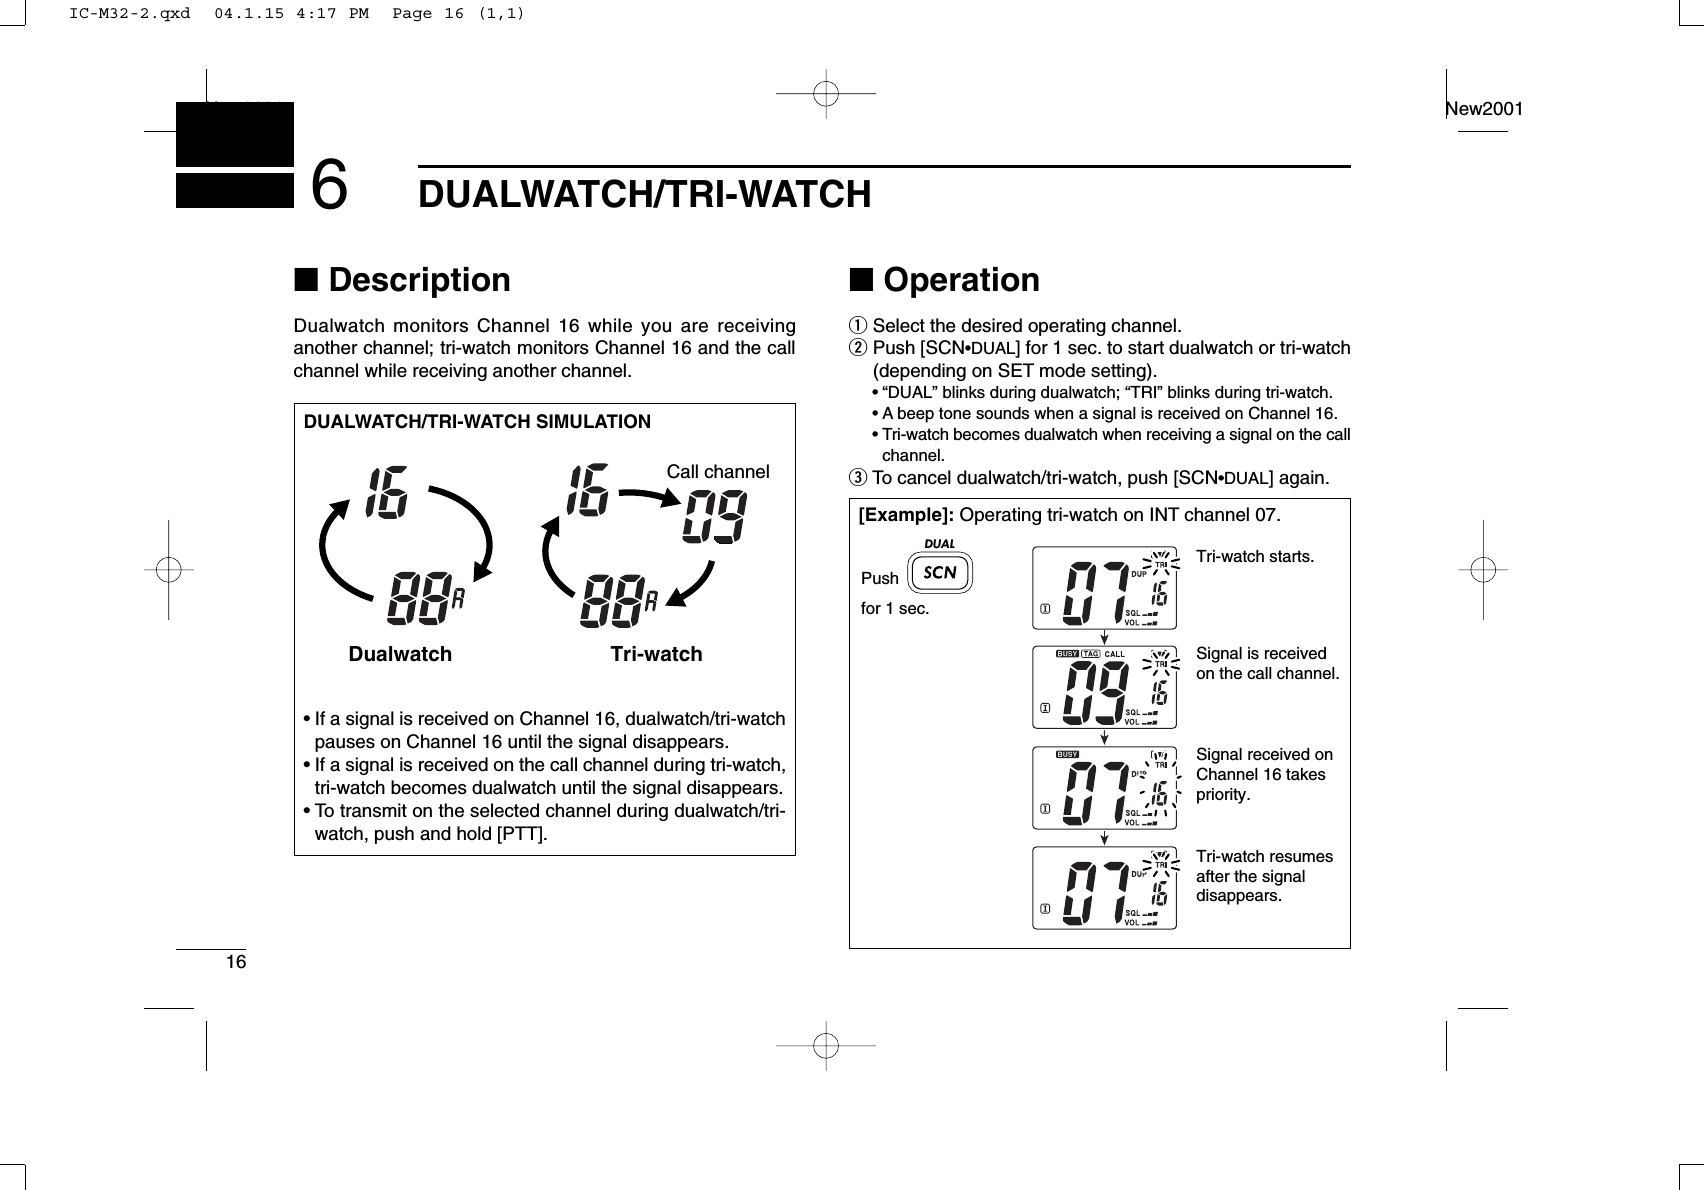 16DUALWATCH/TRI-WATCHNew2001New20016■DescriptionDualwatch monitors Channel 16 while you are receiving another channel; tri-watch monitors Channel 16 and the callchannel while receiving another channel.■OperationqSelect the desired operating channel.wPush [SCN•DUAL] for 1 sec. to start dualwatch or tri-watch(depending on SET mode setting).•“DUAL” blinks during dualwatch; “TRI” blinks during tri-watch.•A beep tone sounds when a signal is received on Channel 16.•Tri-watch becomes dualwatch when receiving a signal on the callchannel.eTo cancel dualwatch/tri-watch, push [SCN•DUAL] again.DUALWATCH/TRI-WATCH SIMULATION•If a signal is received on Channel 16, dualwatch/tri-watchpauses on Channel 16 until the signal disappears.•If a signal is received on the call channel during tri-watch,tri-watch becomes dualwatch until the signal disappears.•To transmit on the selected channel during dualwatch/tri-watch, push and hold [PTT].Dualwatch Tri-watchCall channel[Example]: Operating tri-watch on INT channel 07.Tri-watch starts.Pushfor 1 sec.Signal is received on the call channel.Signal received on Channel 16 takes priority.Tri-watch resumes after the signal disappears.DUALIC-M32-2.qxd  04.1.15 4:17 PM  Page 16 (1,1)